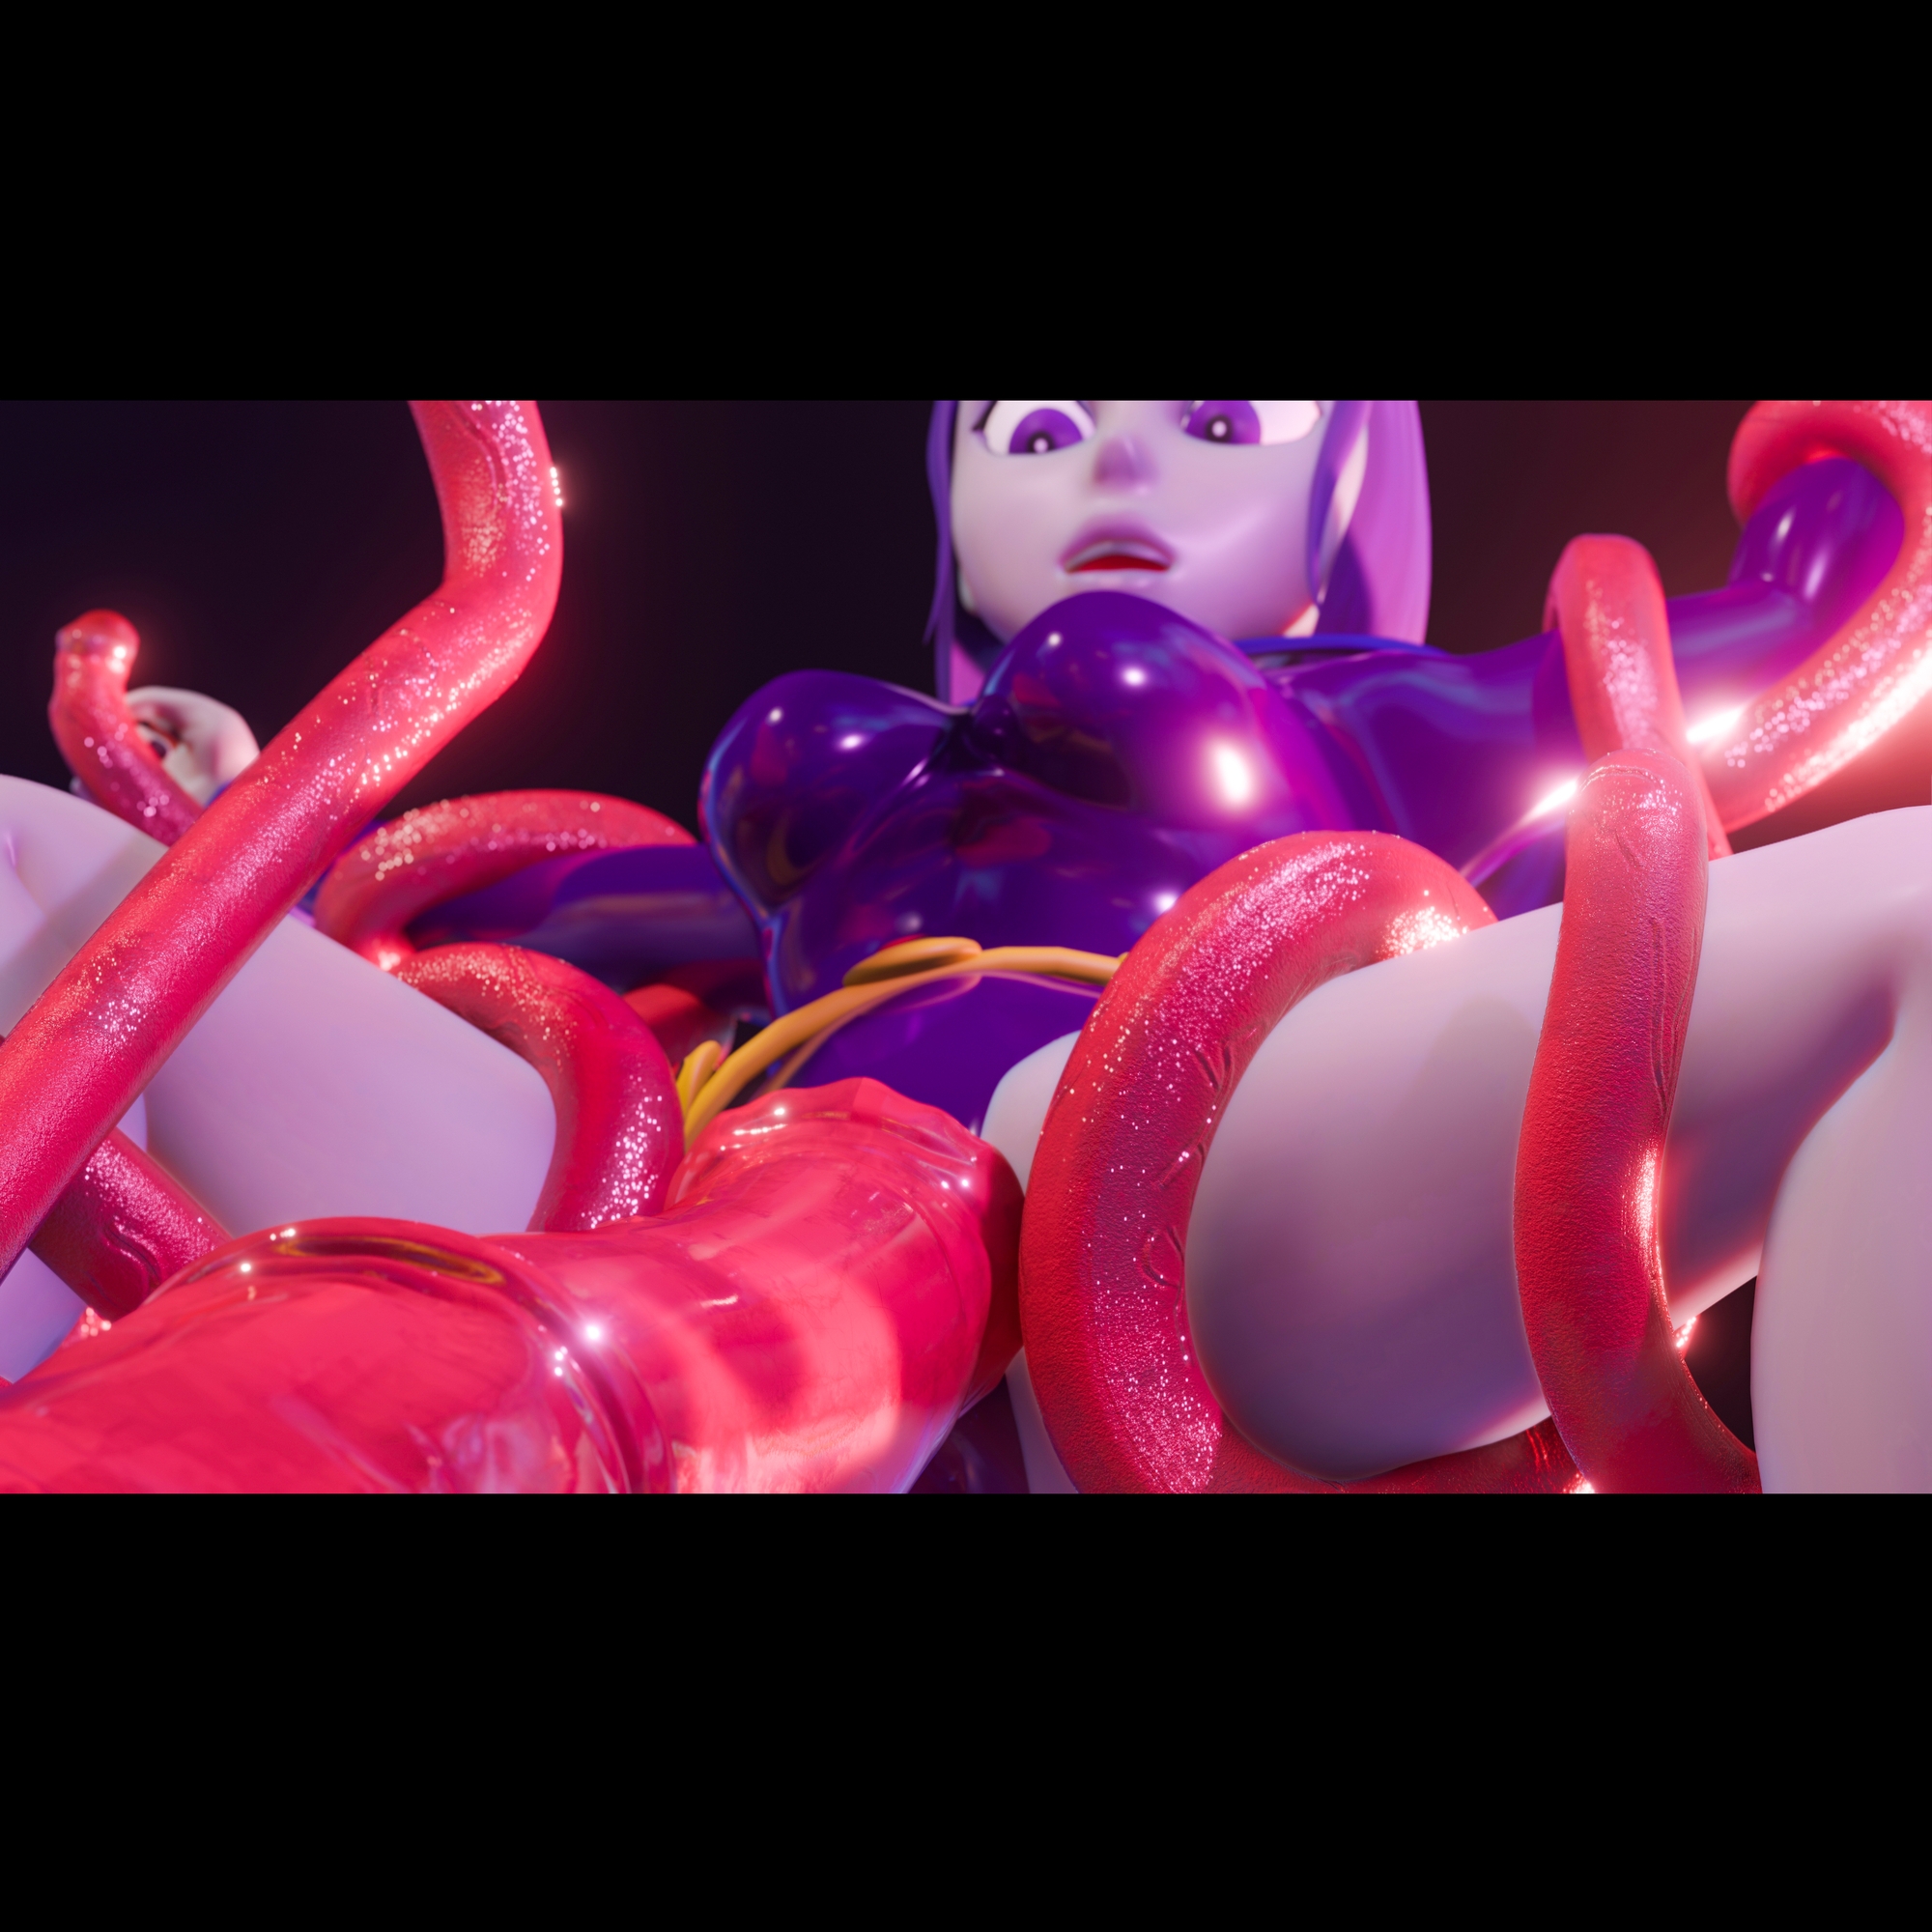 Raven tentacled Raven (teen Titans) Tentacles Cum Cum Inflation All The Way Through 11